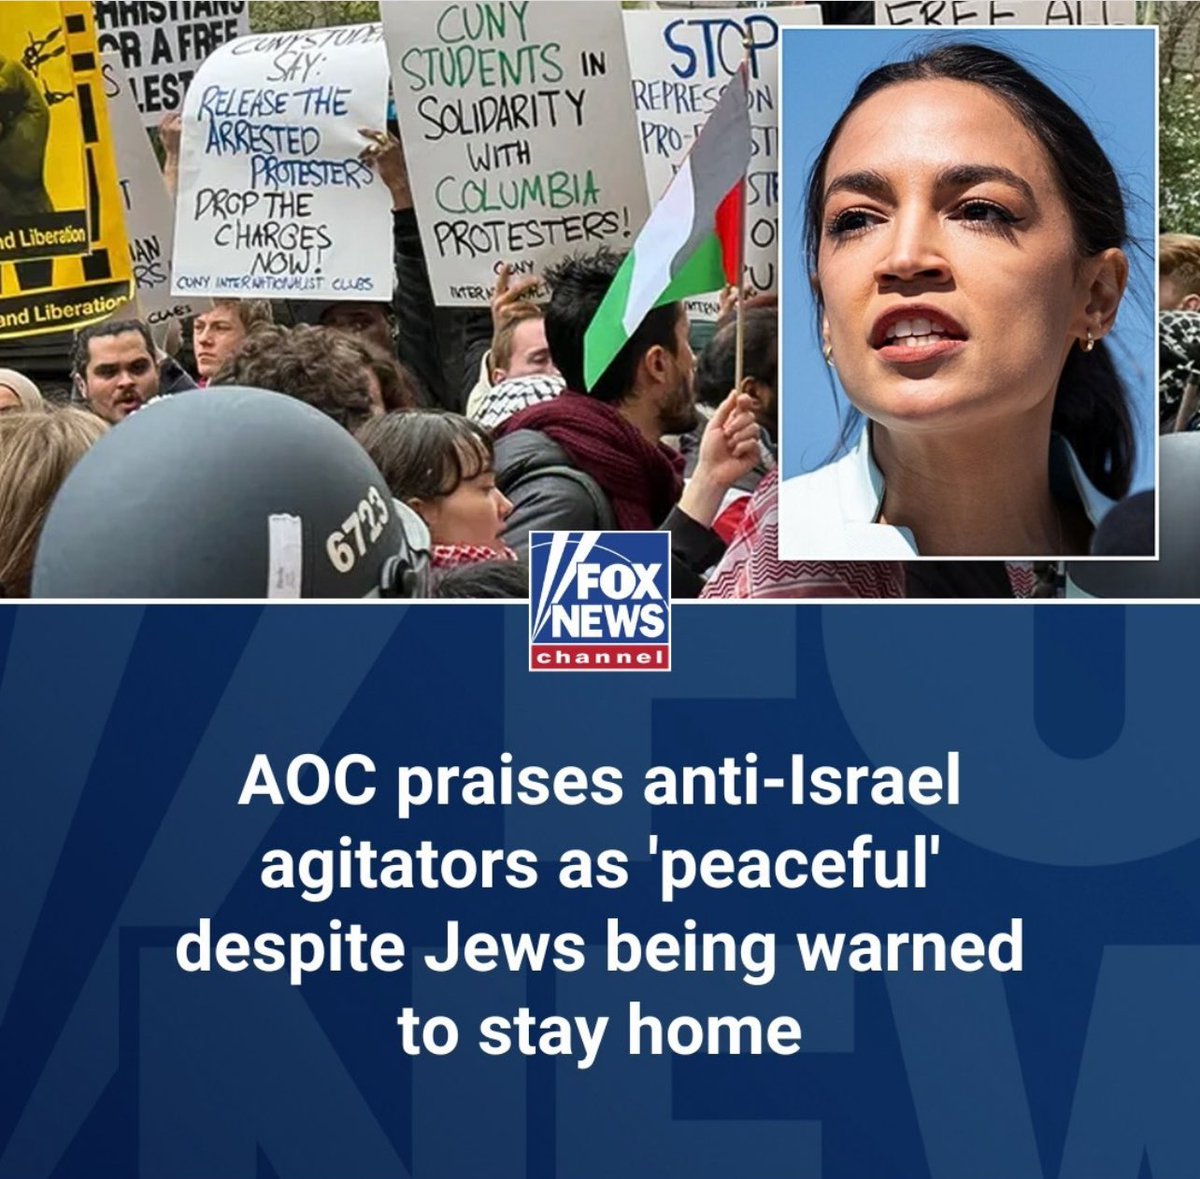 AOC is not the brightest bulb in the pack but Biden seems to listen to her. How can “Anti Israel” protesters be viewed as peaceful when they are refusing to let anyone Jewish on to the Campus?